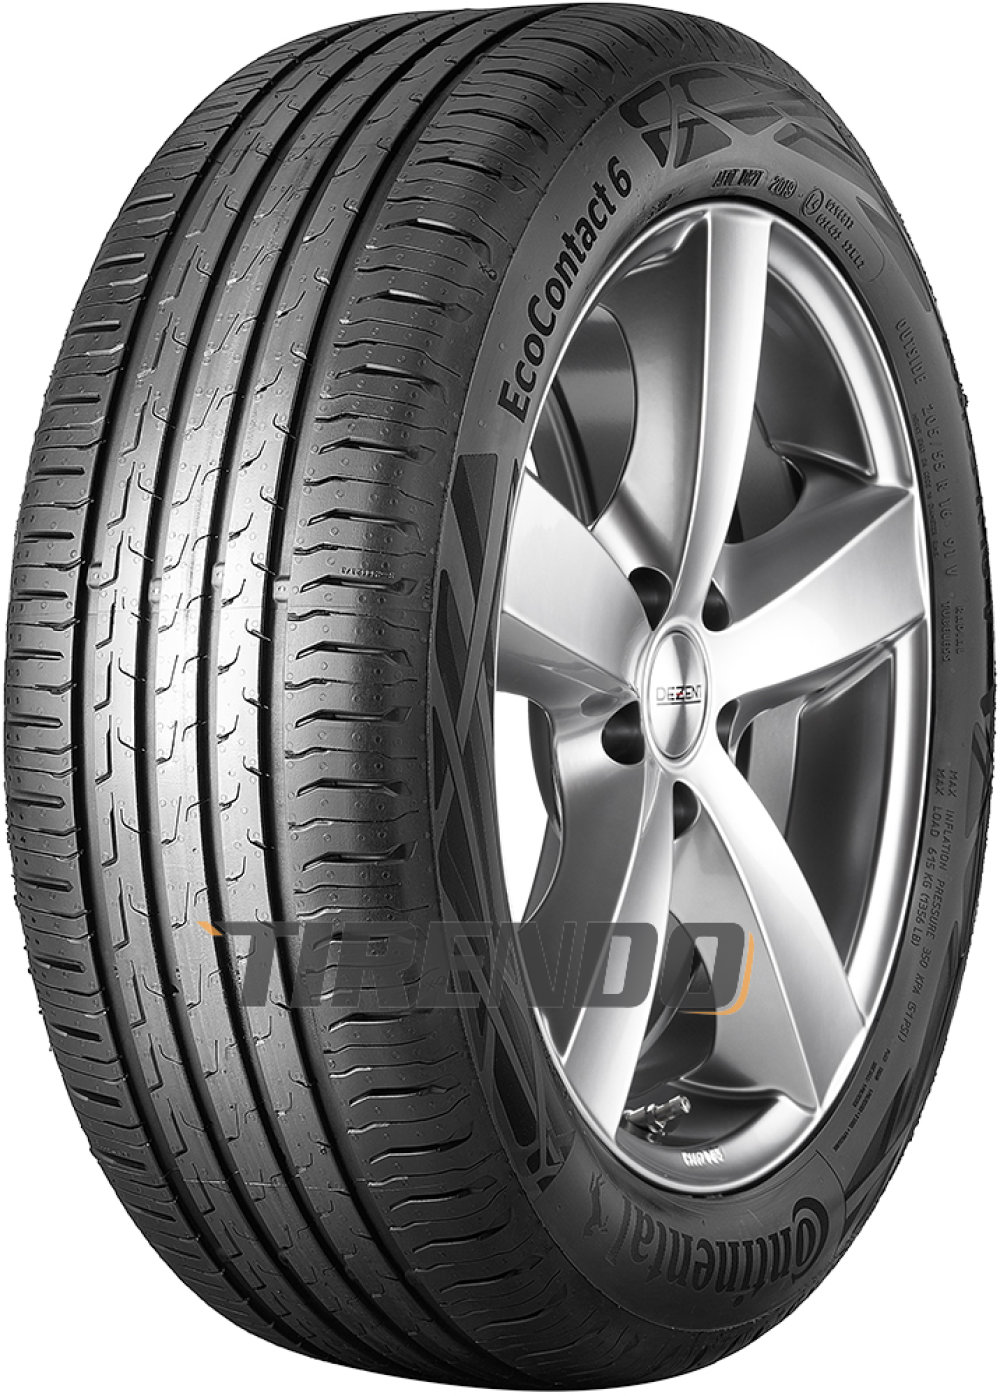 4x Sommerreifen - Continental Ecocontact 6 (evc) 215/55r17 94v